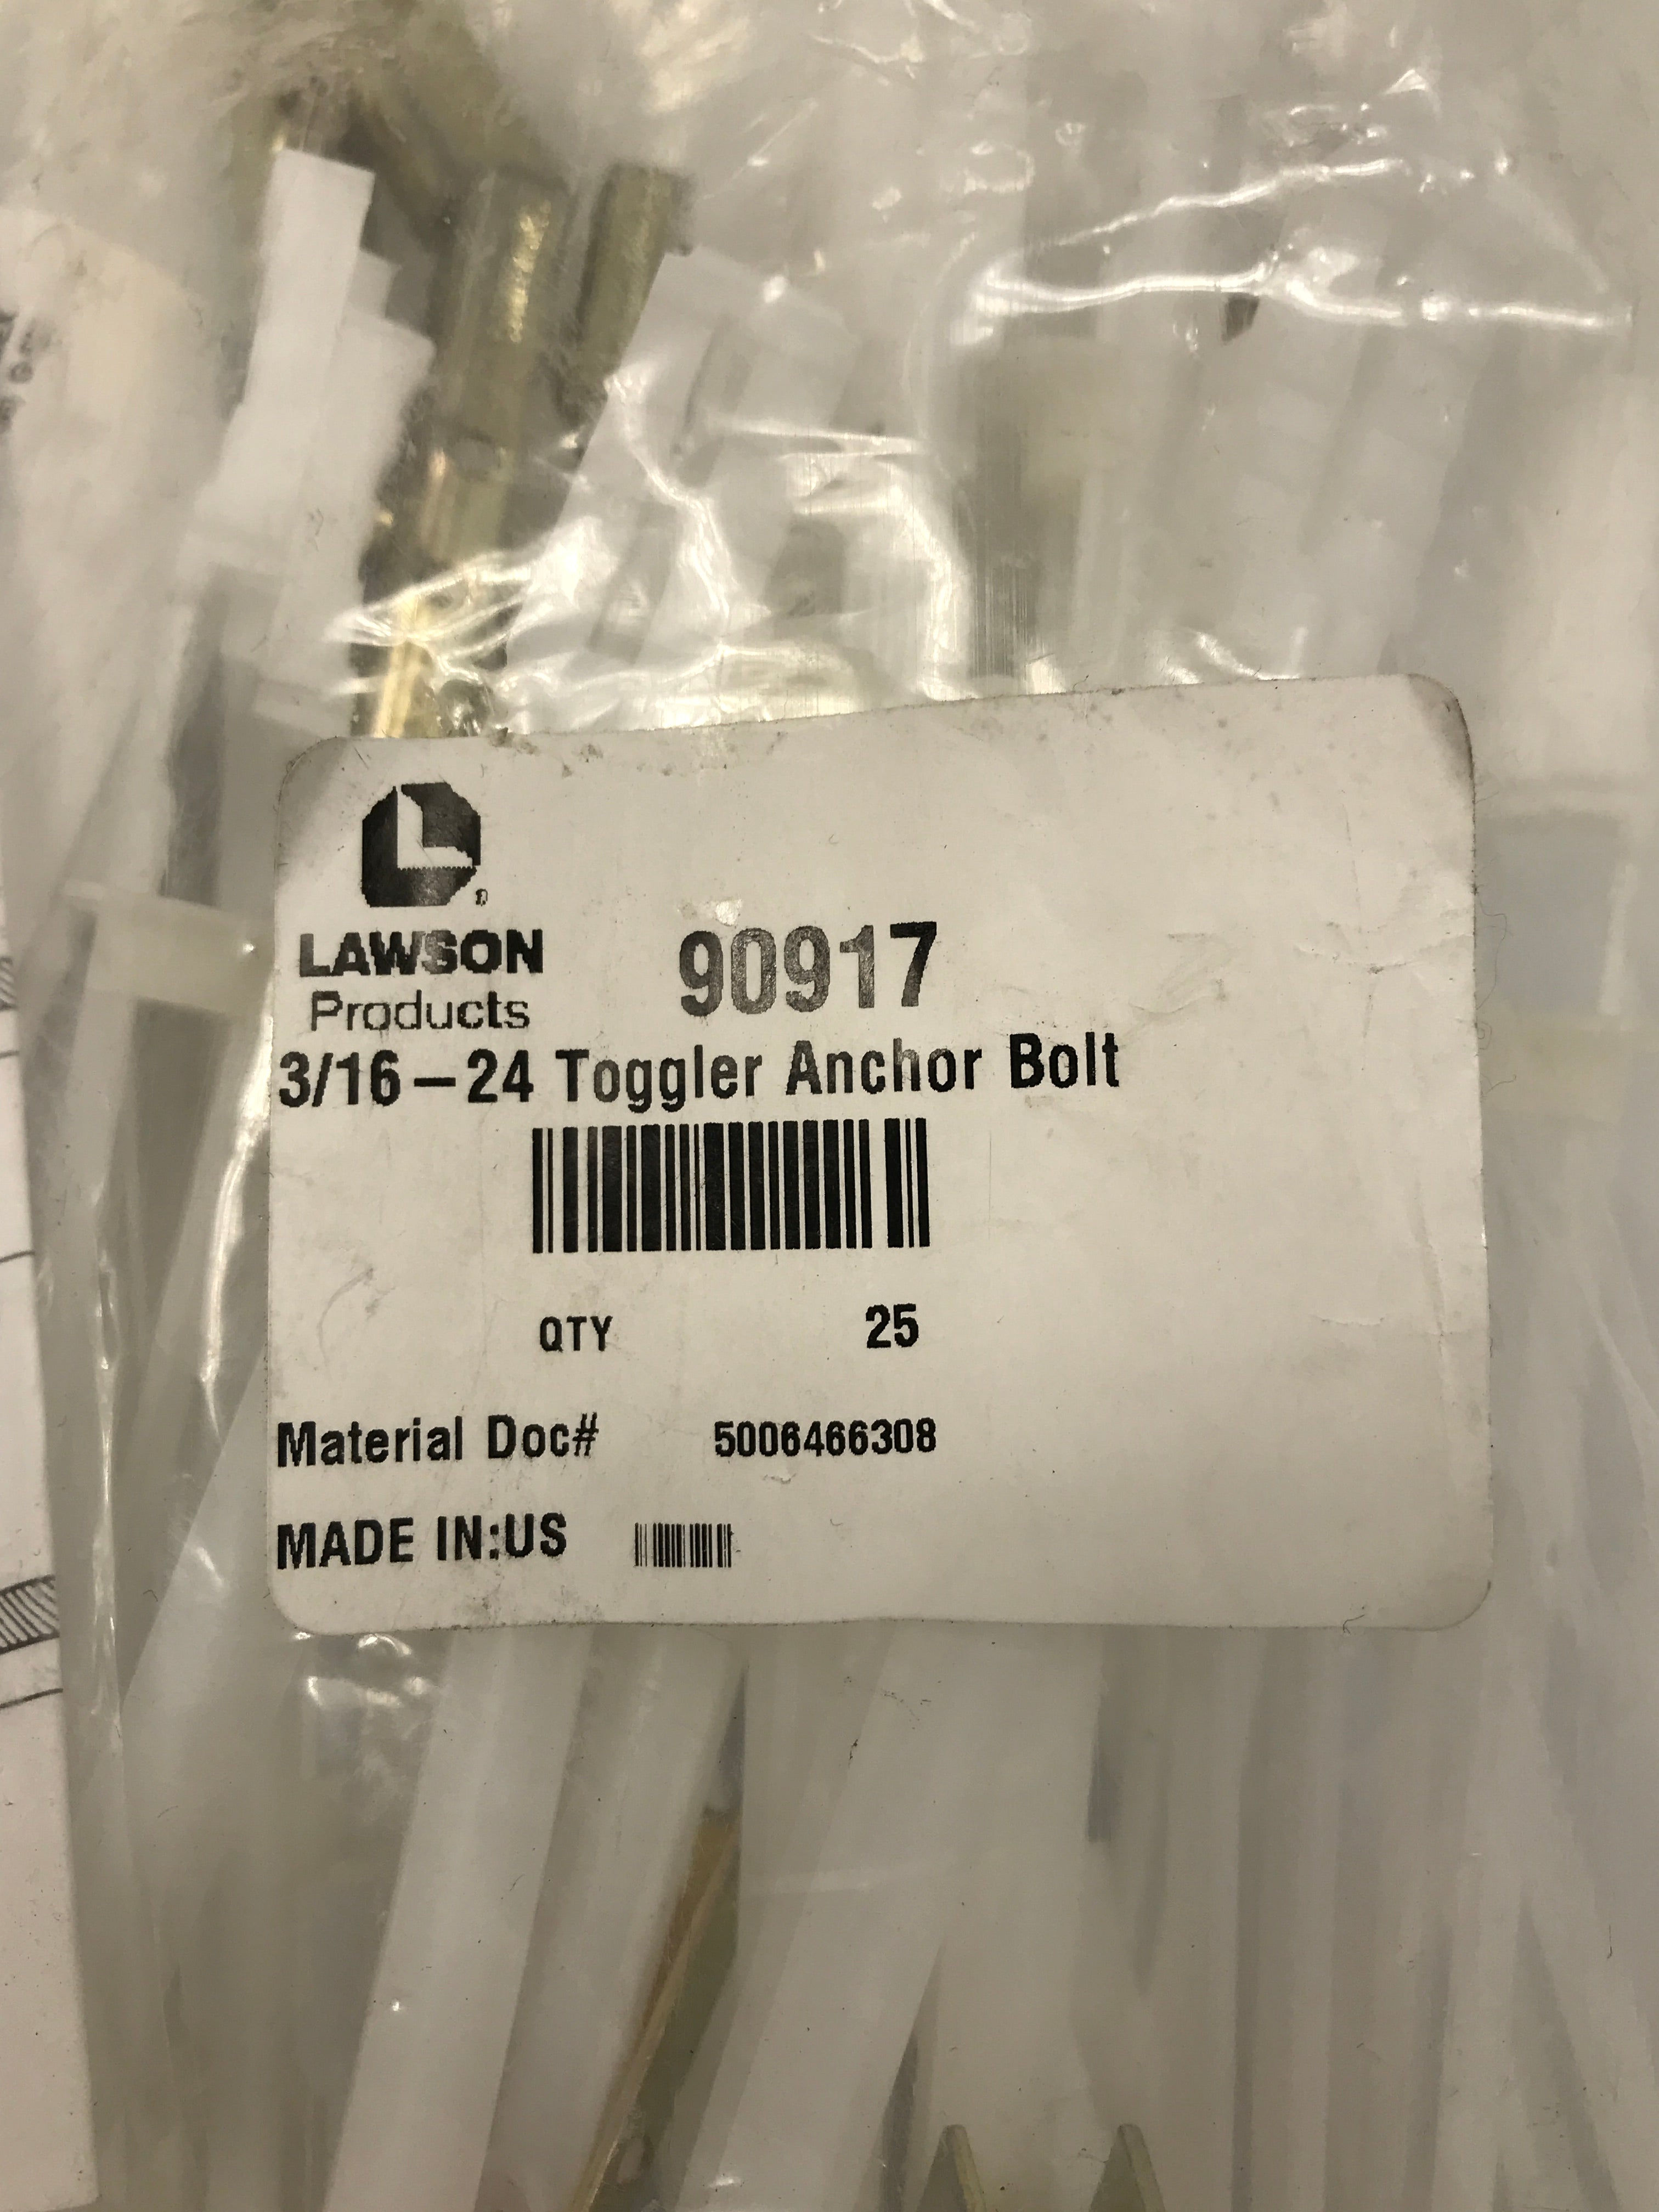 Lot of 25 Lawson 3/16-24 Toggler Anchor Bolt 90917 New in Package